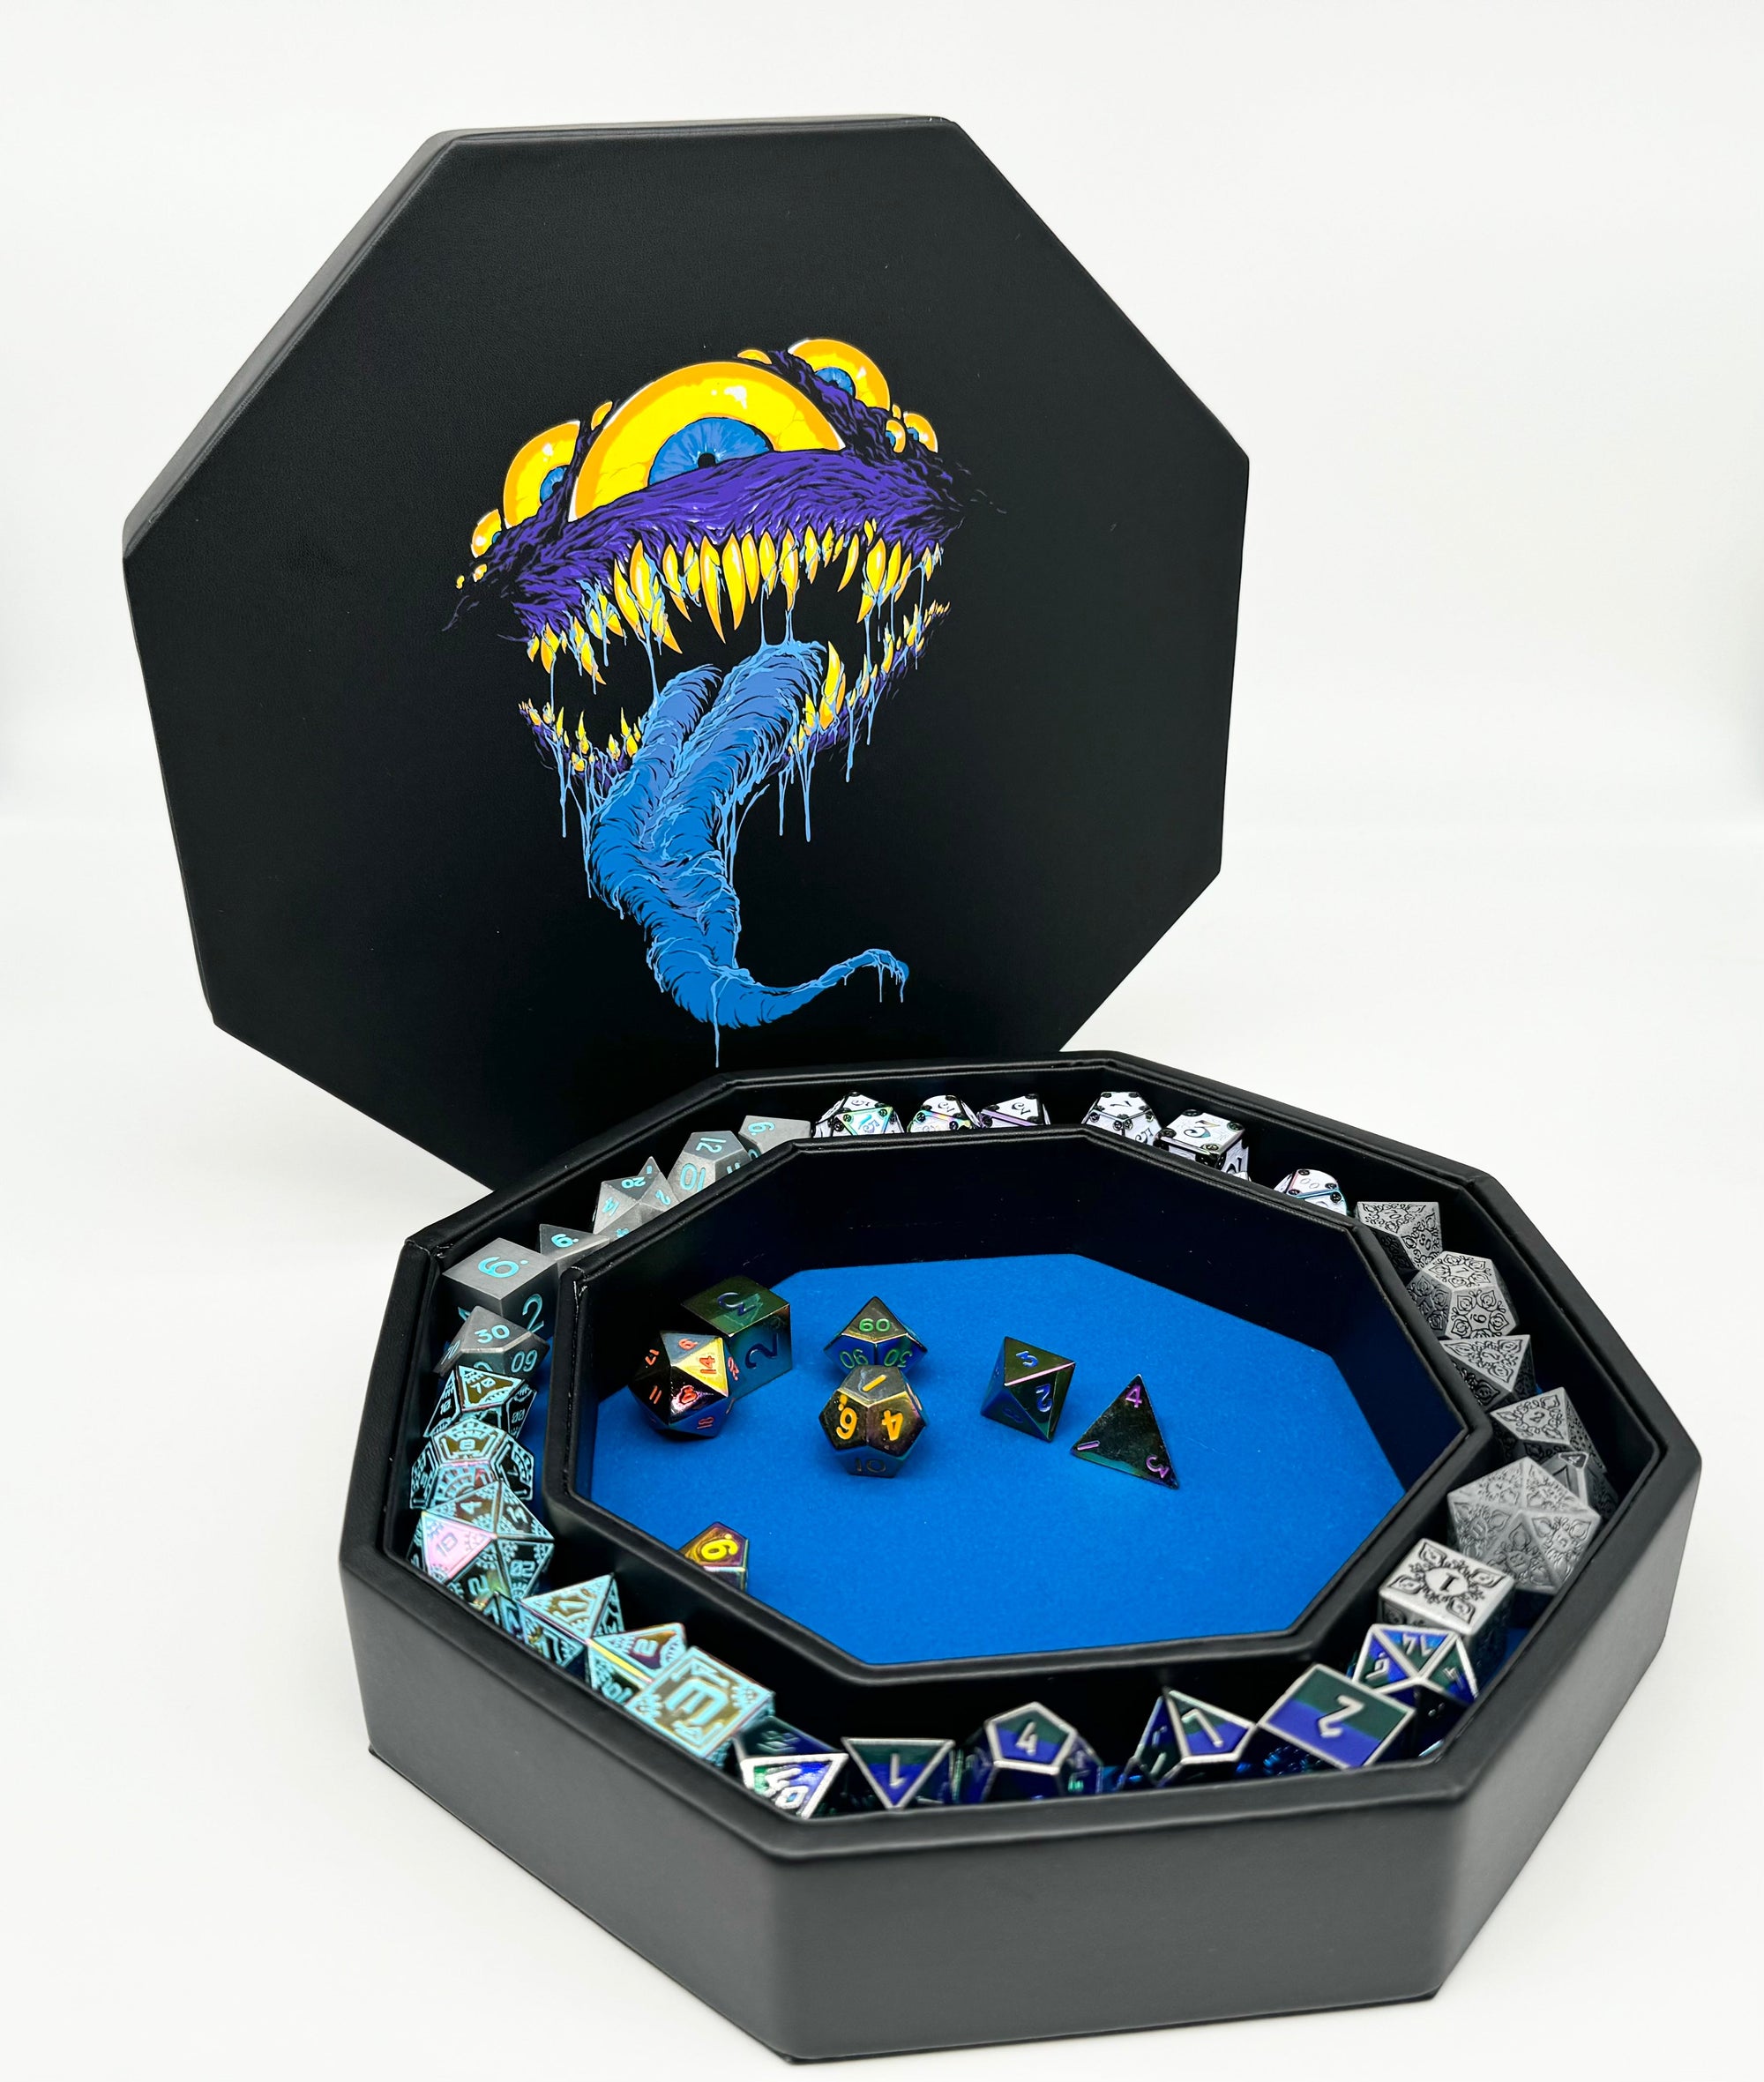 Mimic - Tray of Holding™ Dice Tray by Norse Foundry - NOR 03014